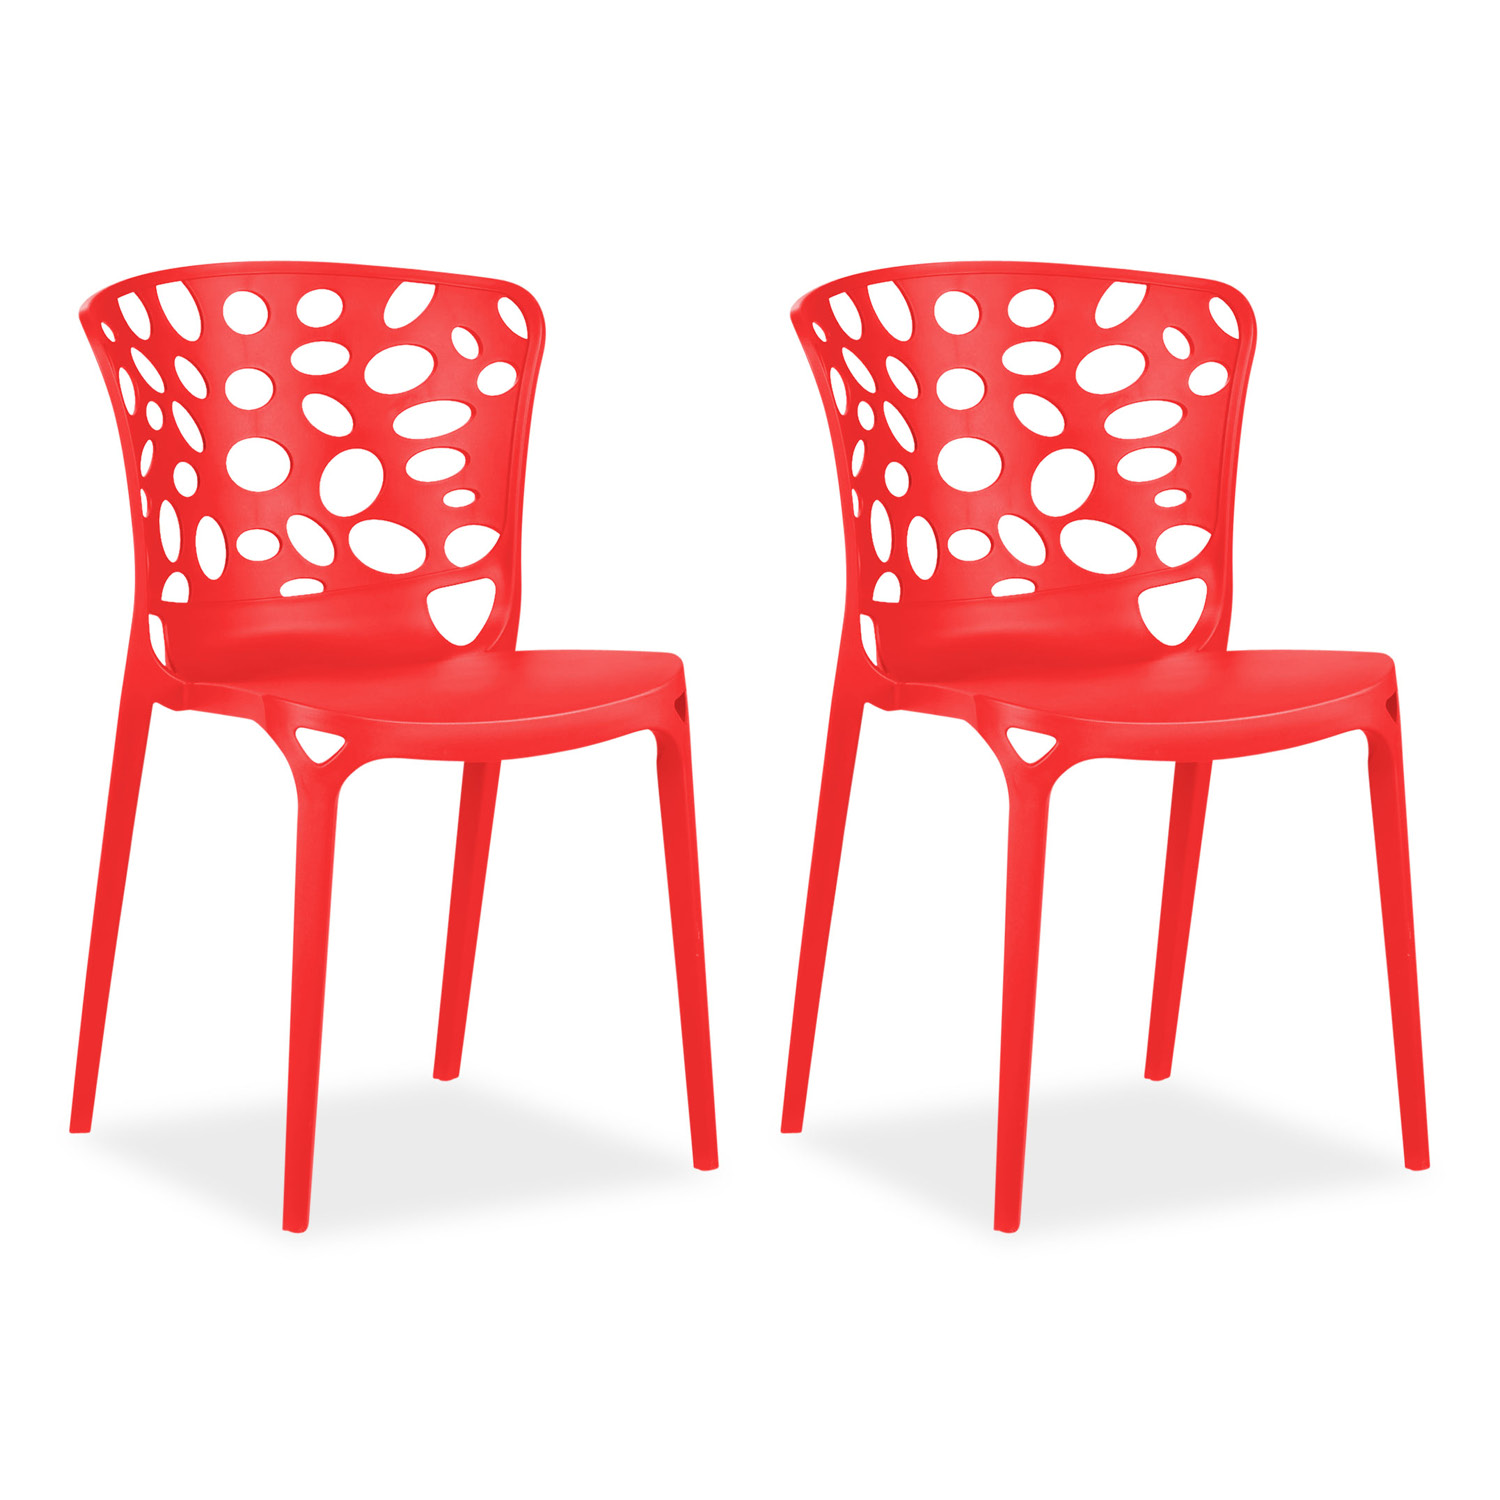 Set of 2, 4, 6 Garden chair Modern 3 colours Camping chairs Outdoor chairs Plastic Stacking chairs Kitchen chairs